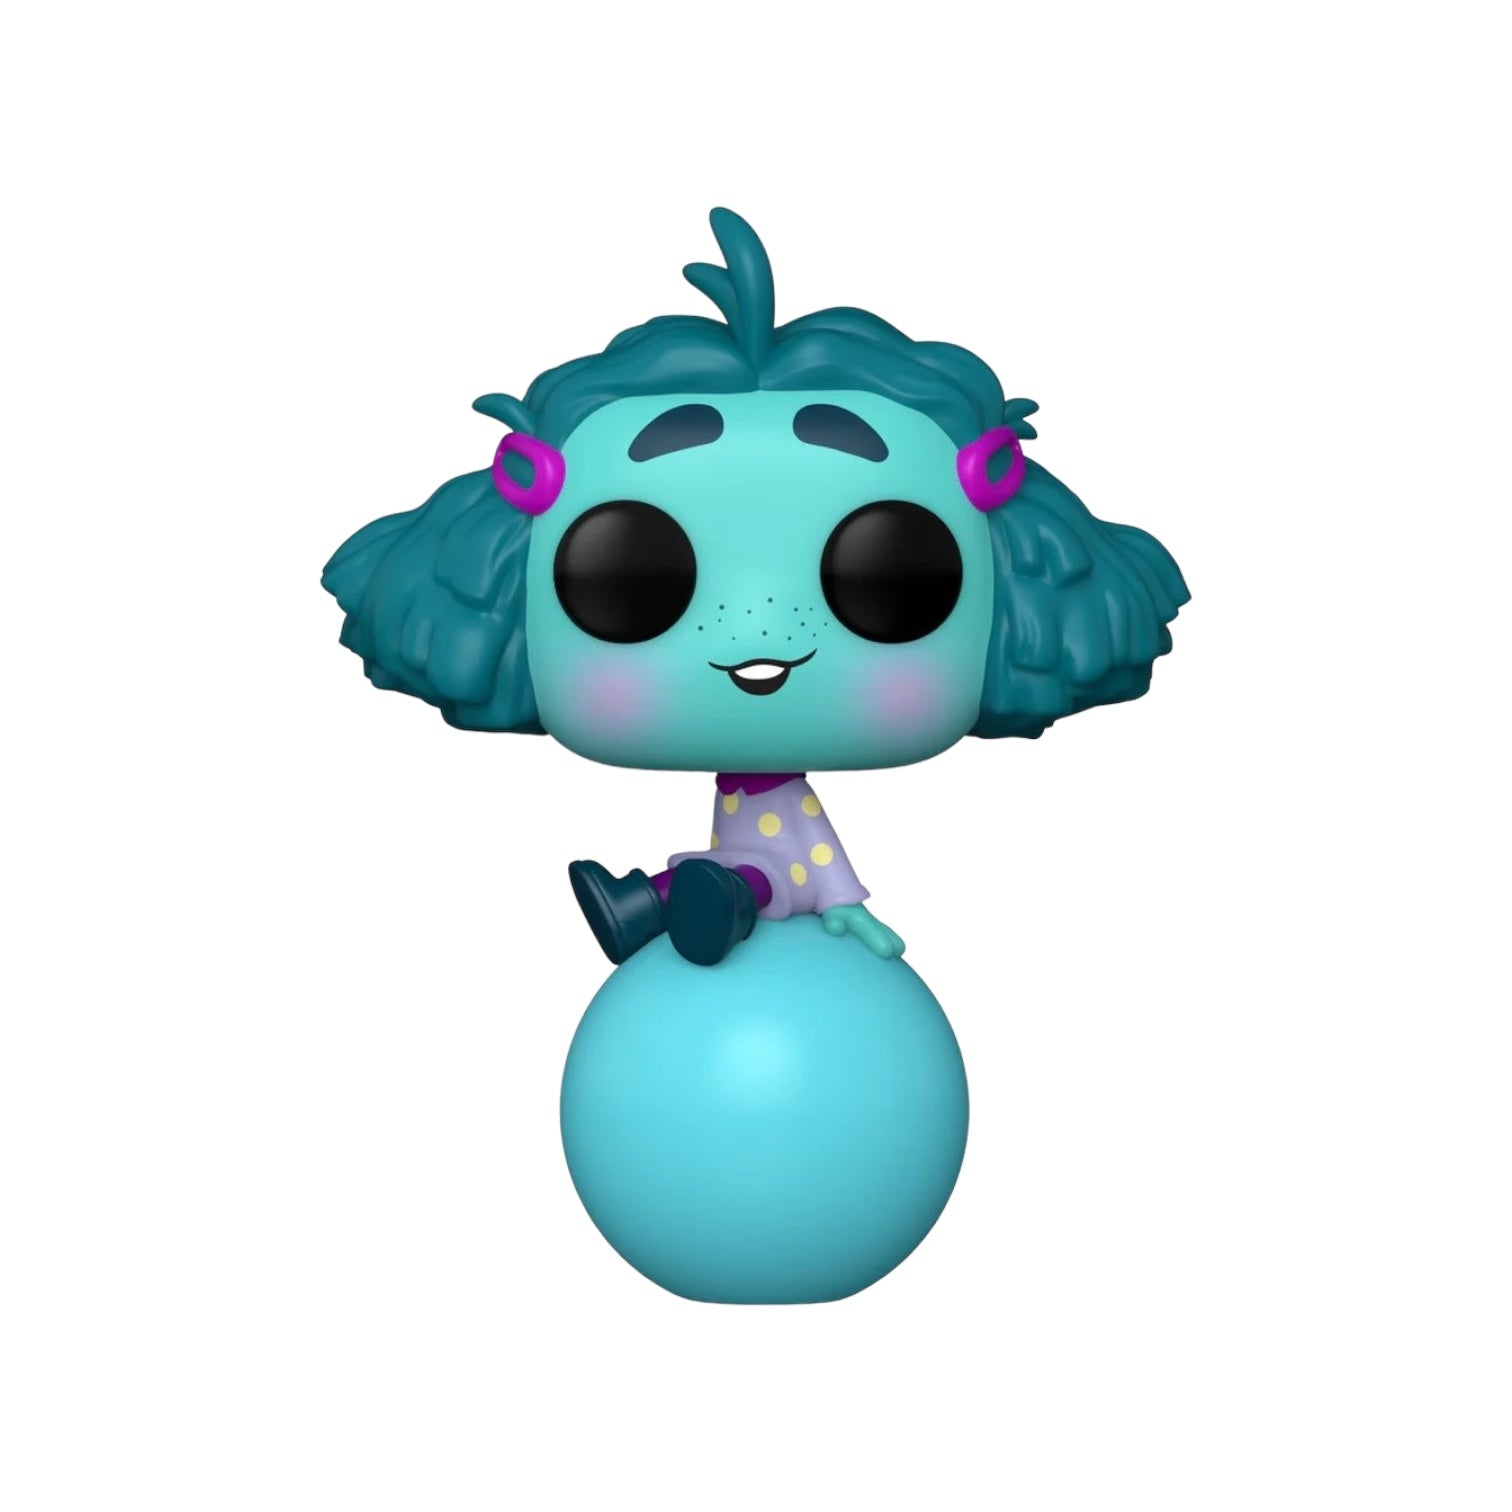 Envy on memory orb #1449 Funko Pop!  - Inside Out 2 - PREORDER